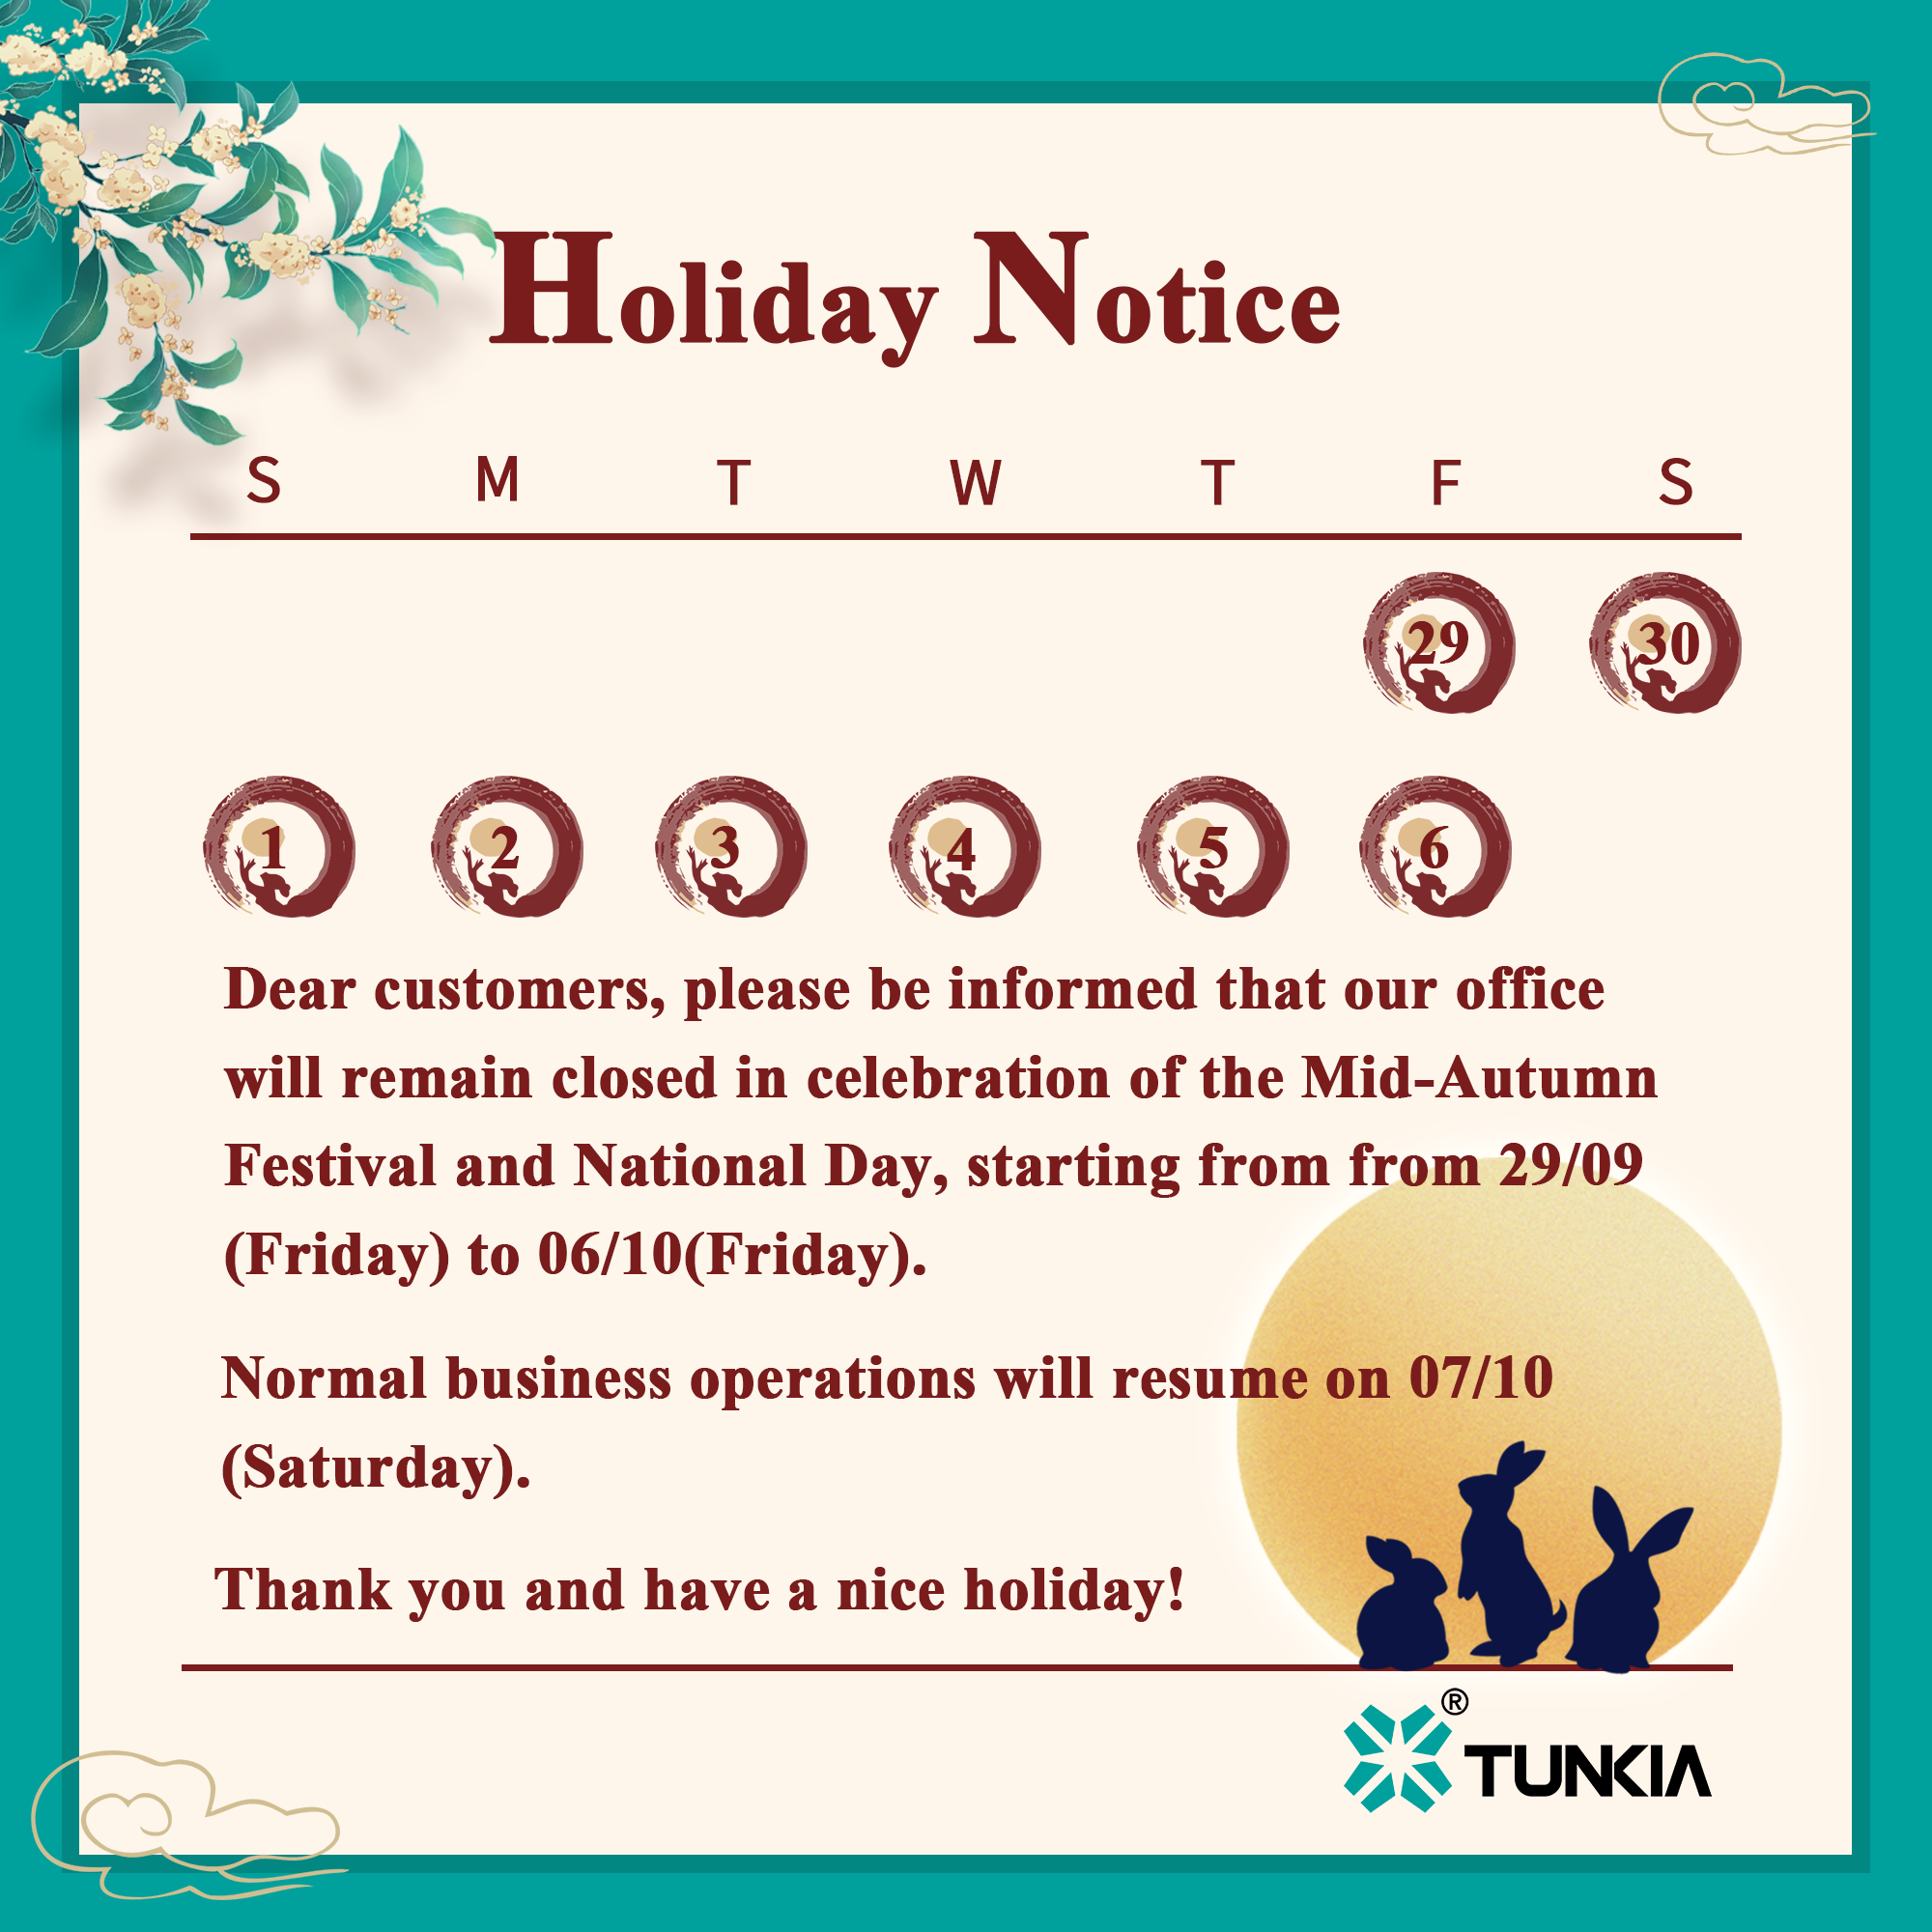 Holiday notice: Mid-autumn festival & National Day